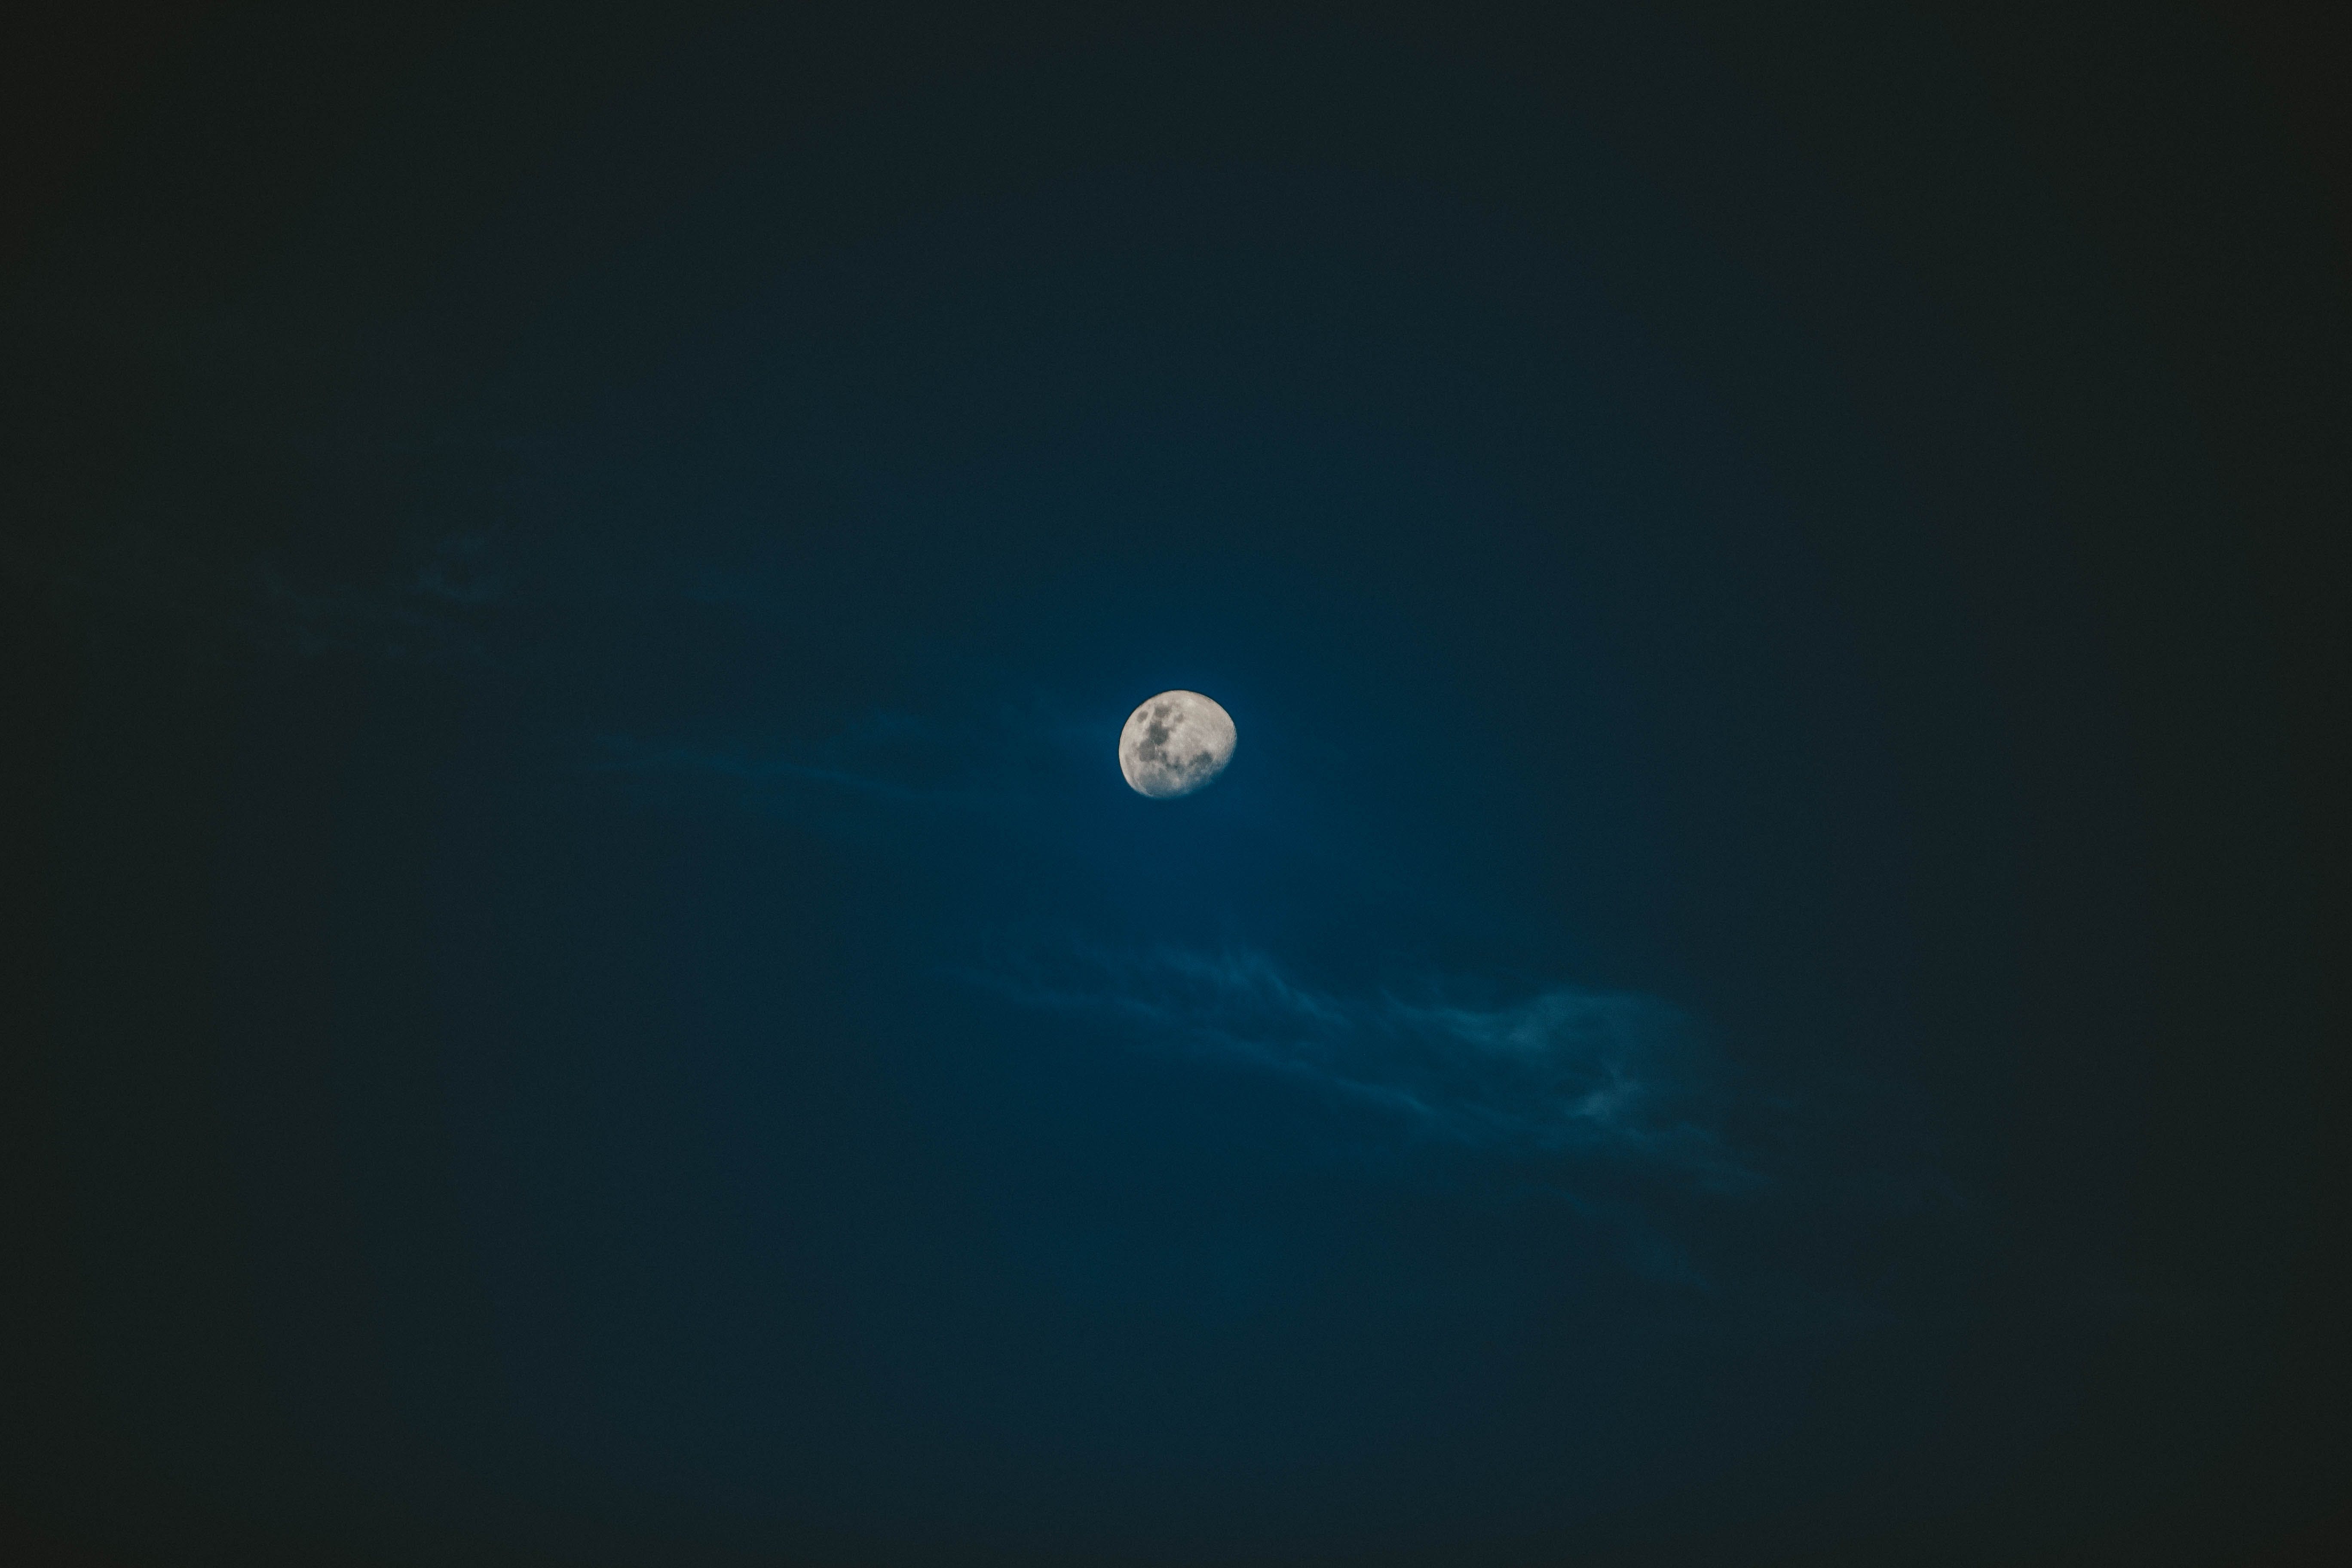 Biblical Meaning of Moon in Dreams